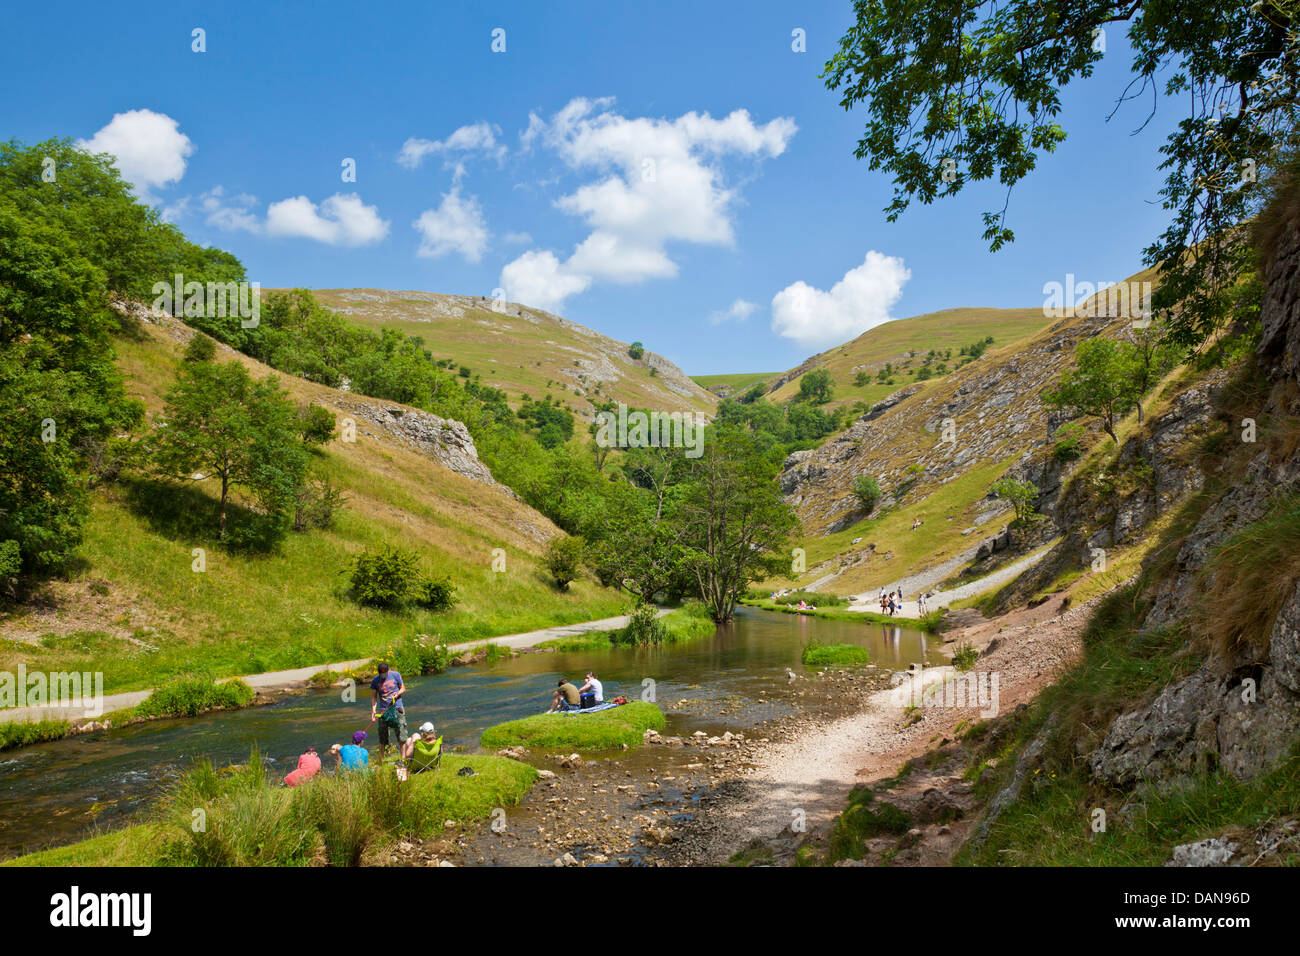 Tourists sat by the River Dove in Dovedale Derbyshire peak district national park England UK GB EU Europe Stock Photo